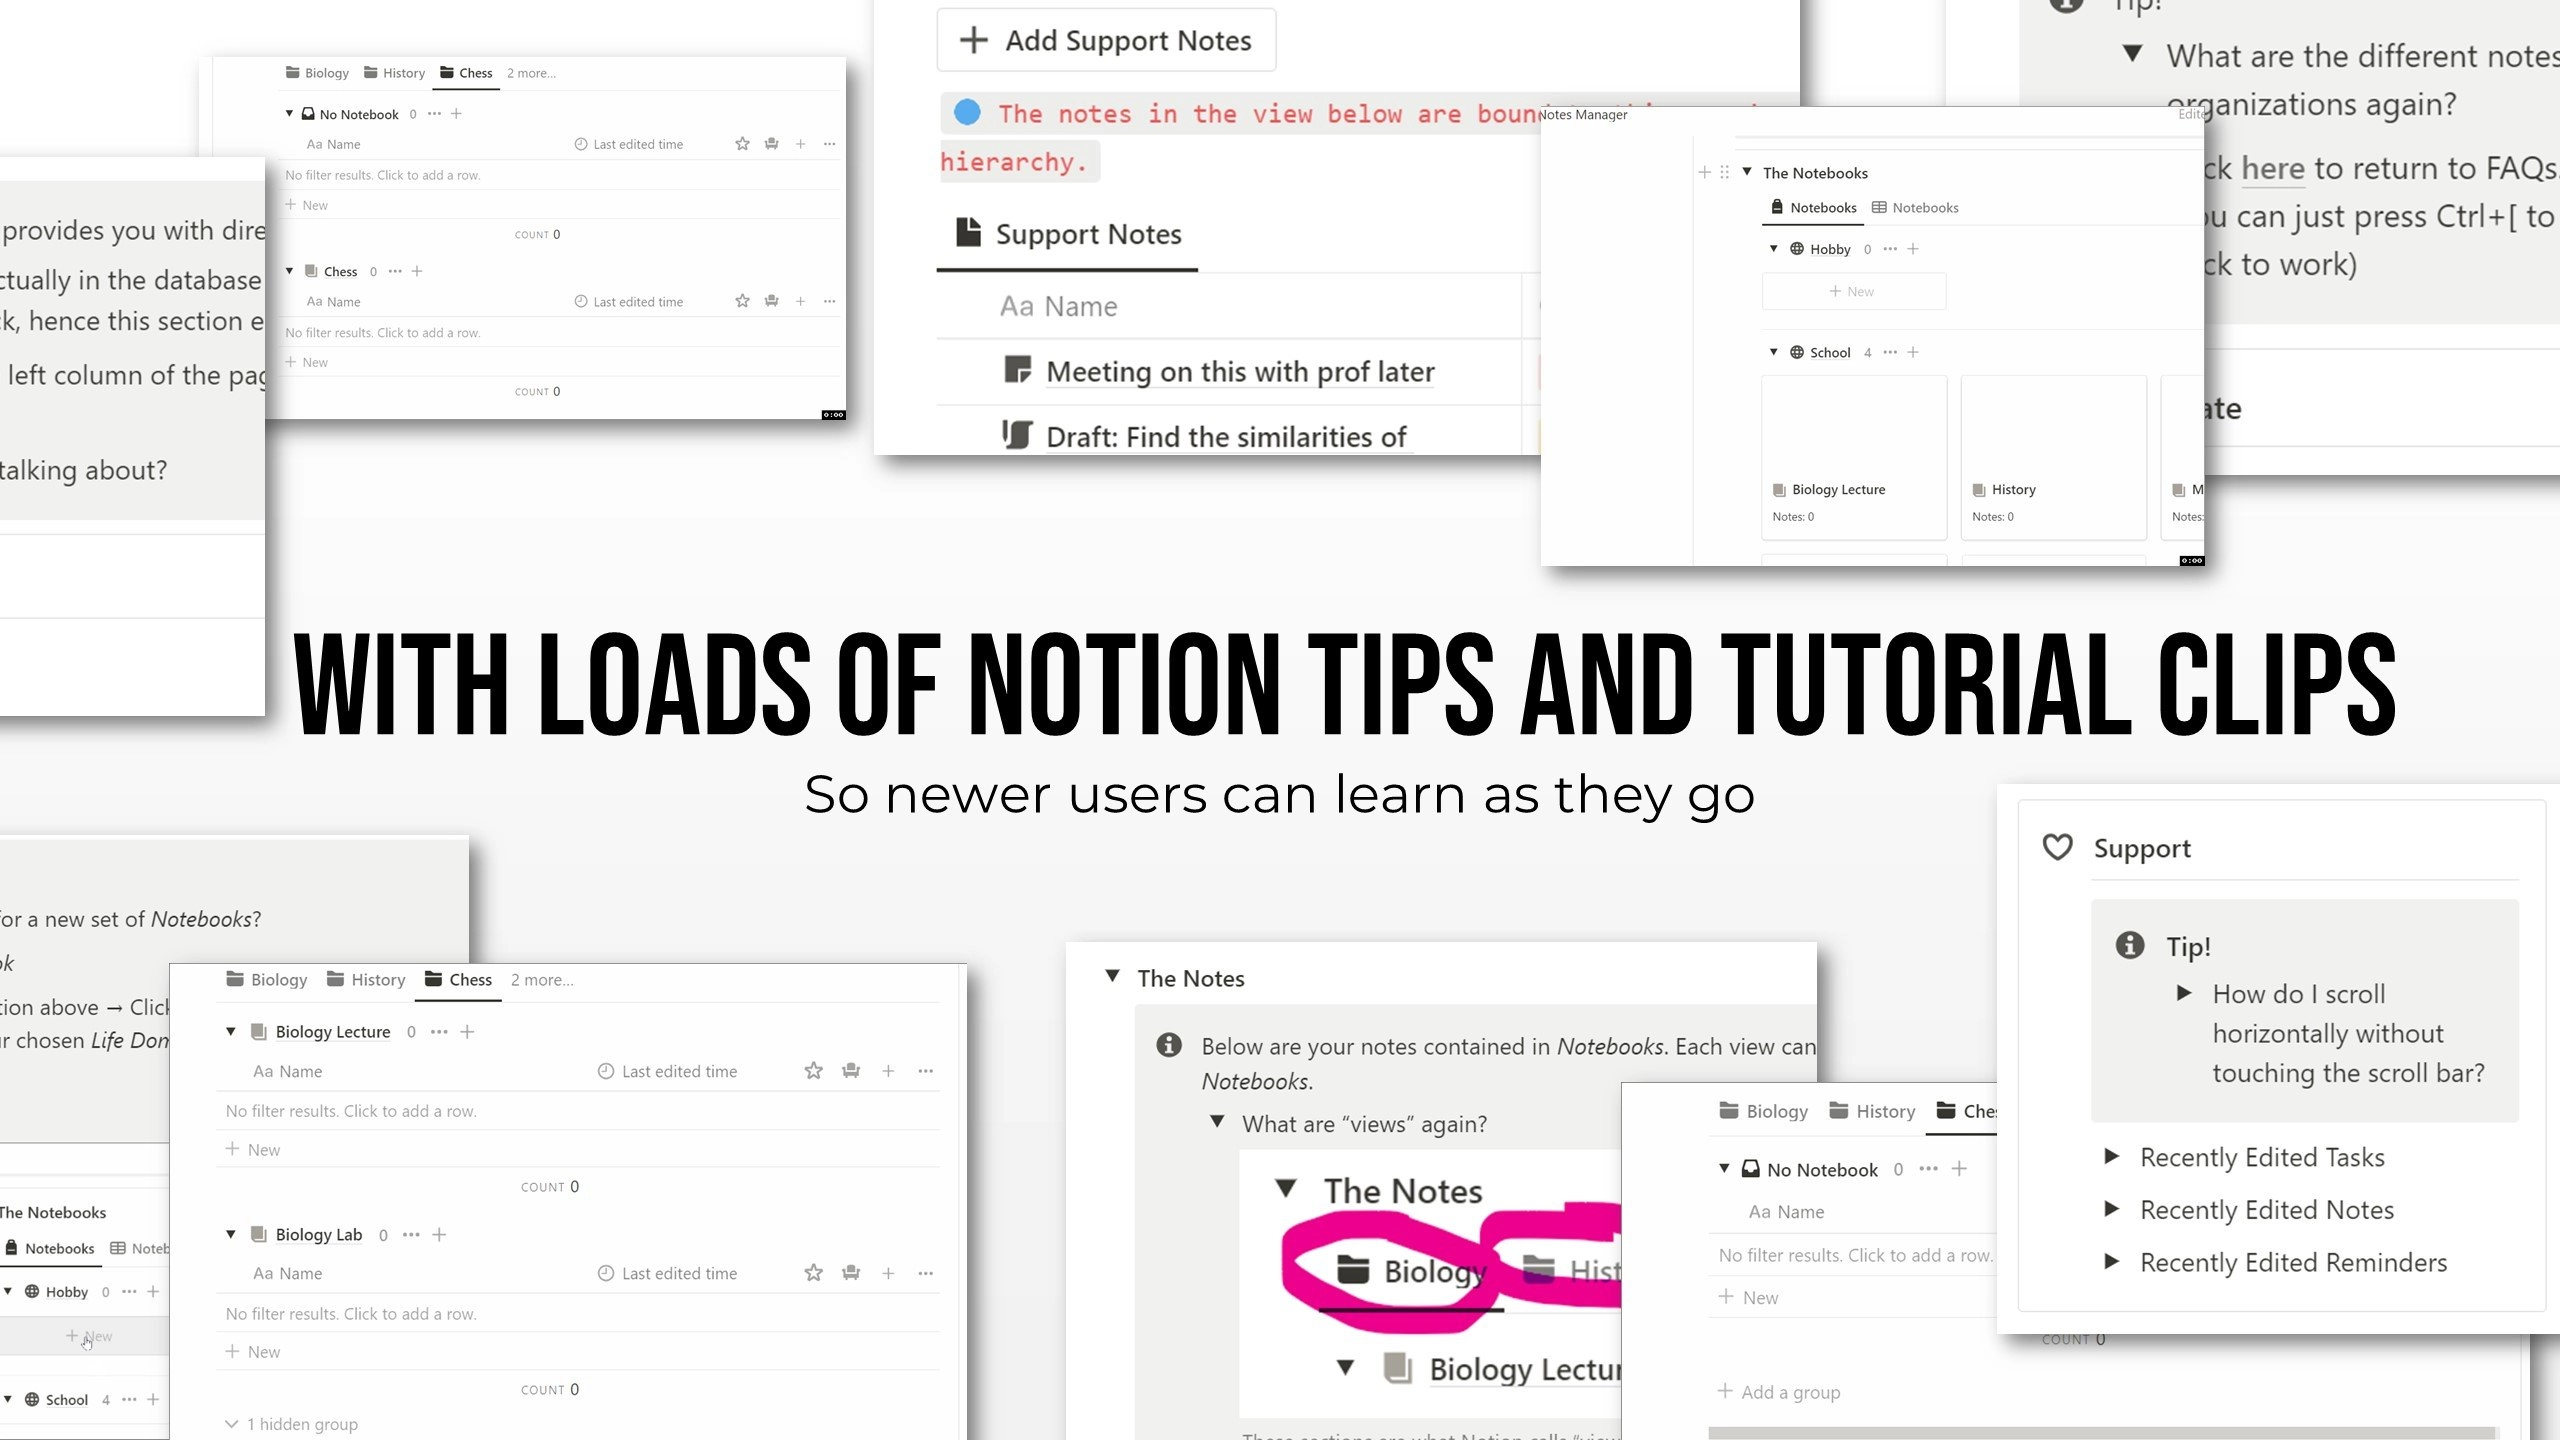 Notion Notes Manager